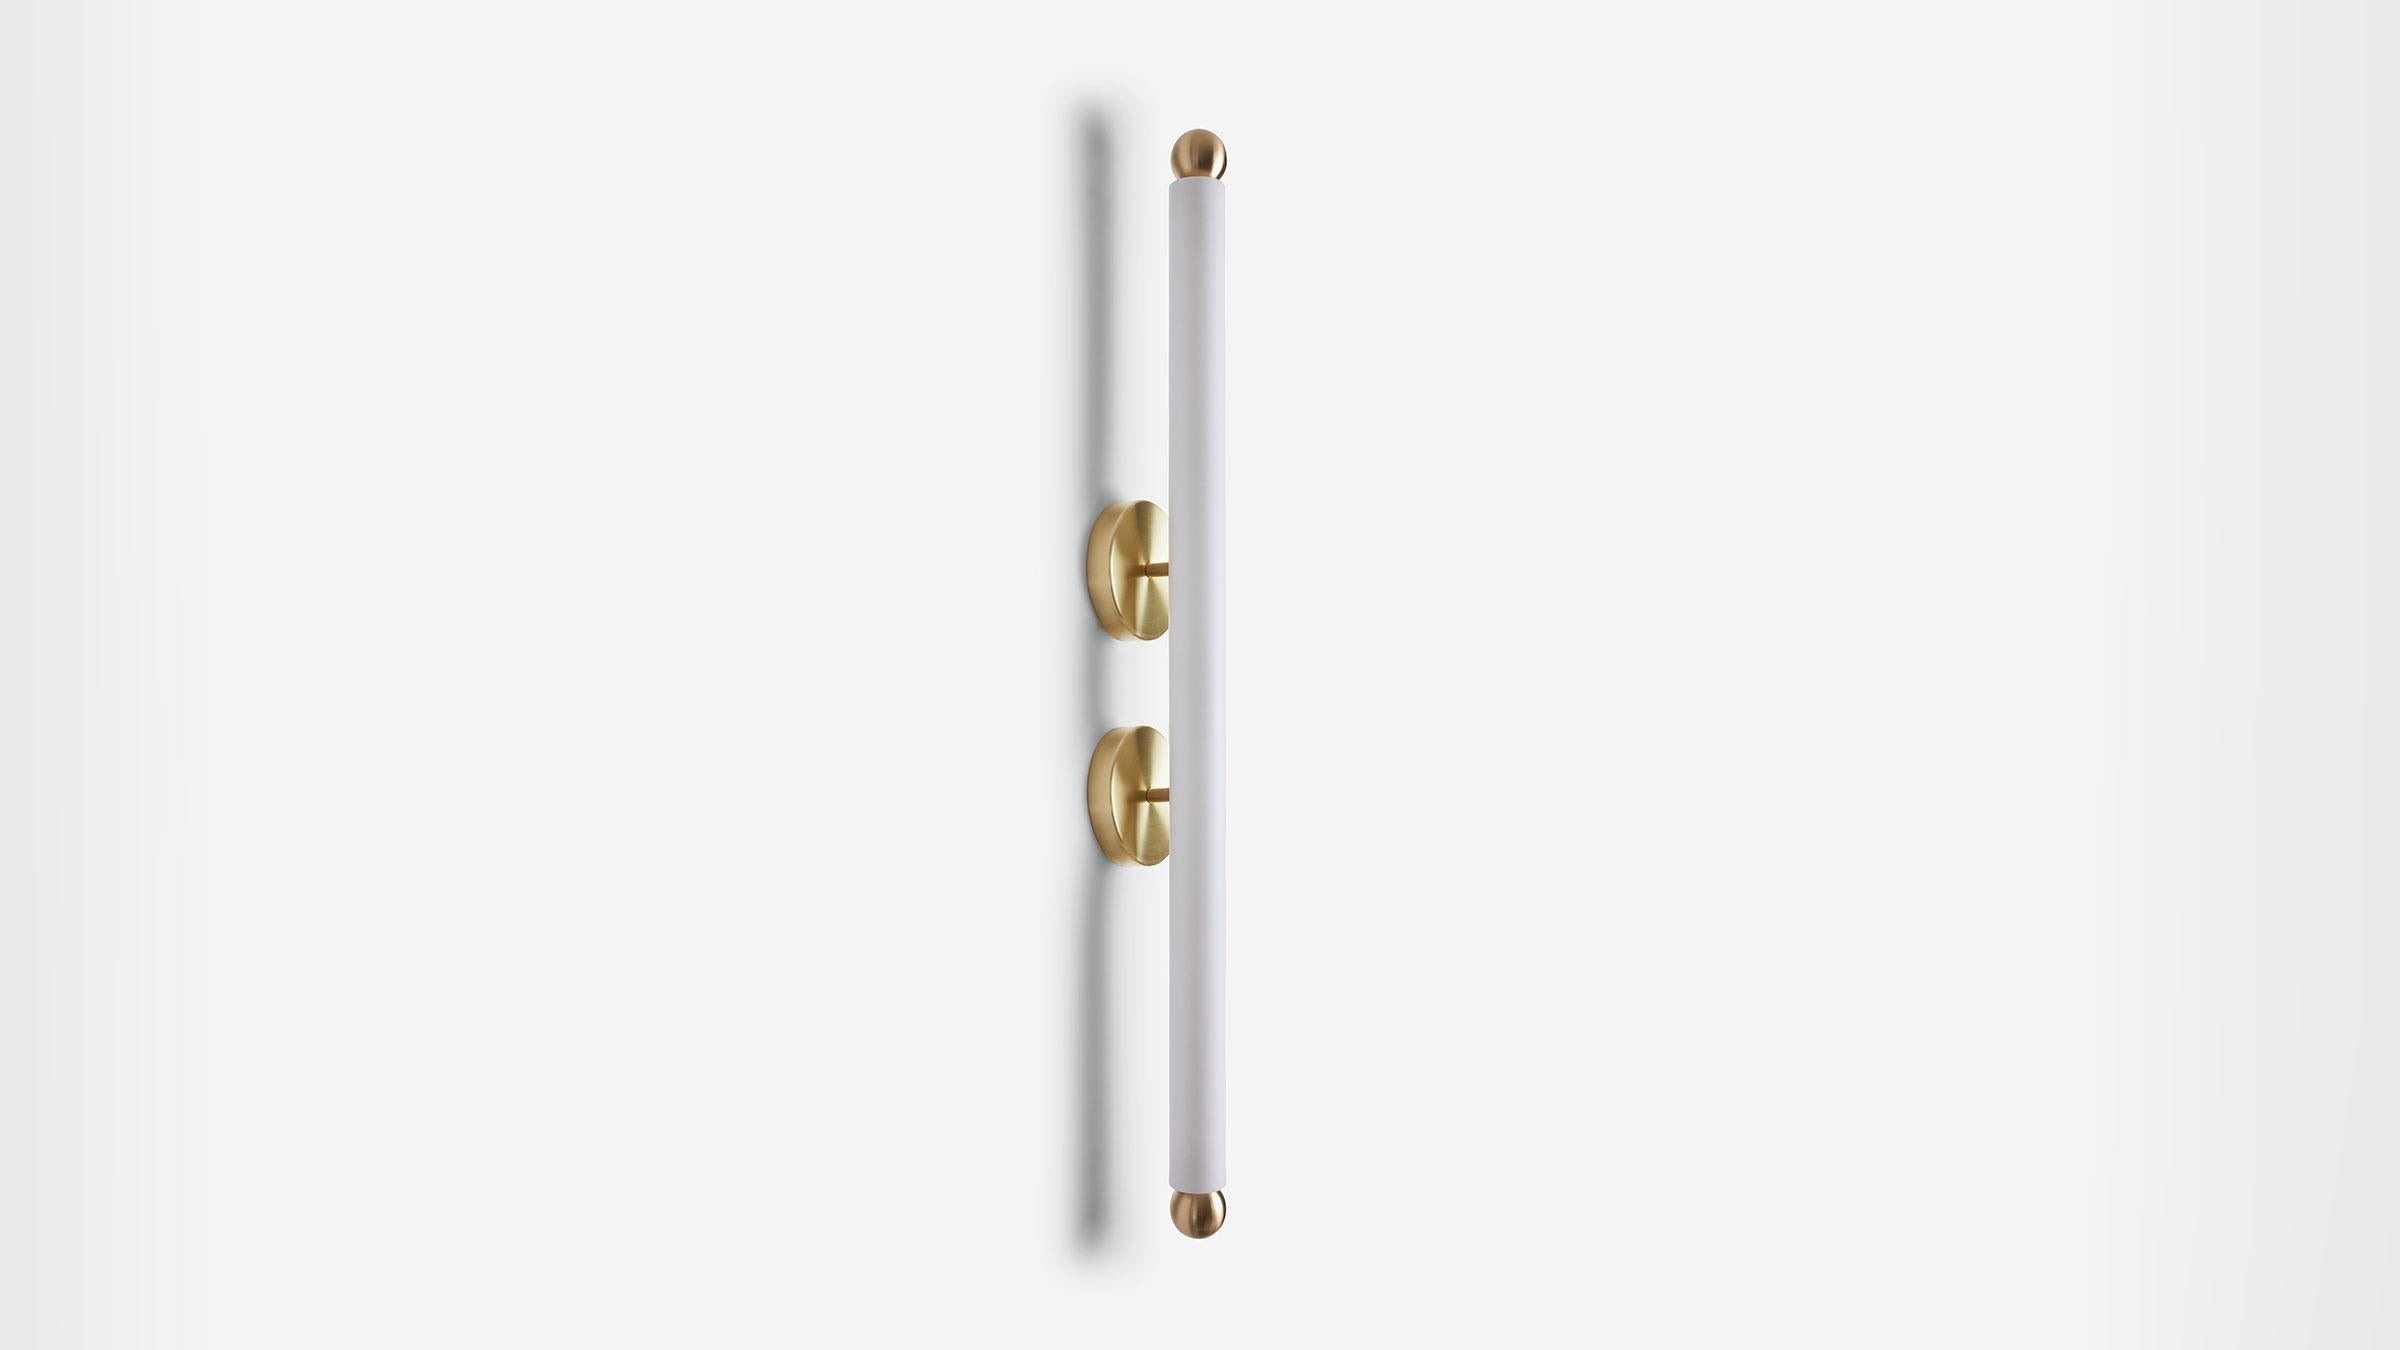 TUBE SCONCE XL Twin spun metal backplates anchor and elevate the bright light of the TUBE collection. With an extended matte blown-glass cylinder this graphic combination of light and hardware adds a bright and percussive rhythm to any space. UL,